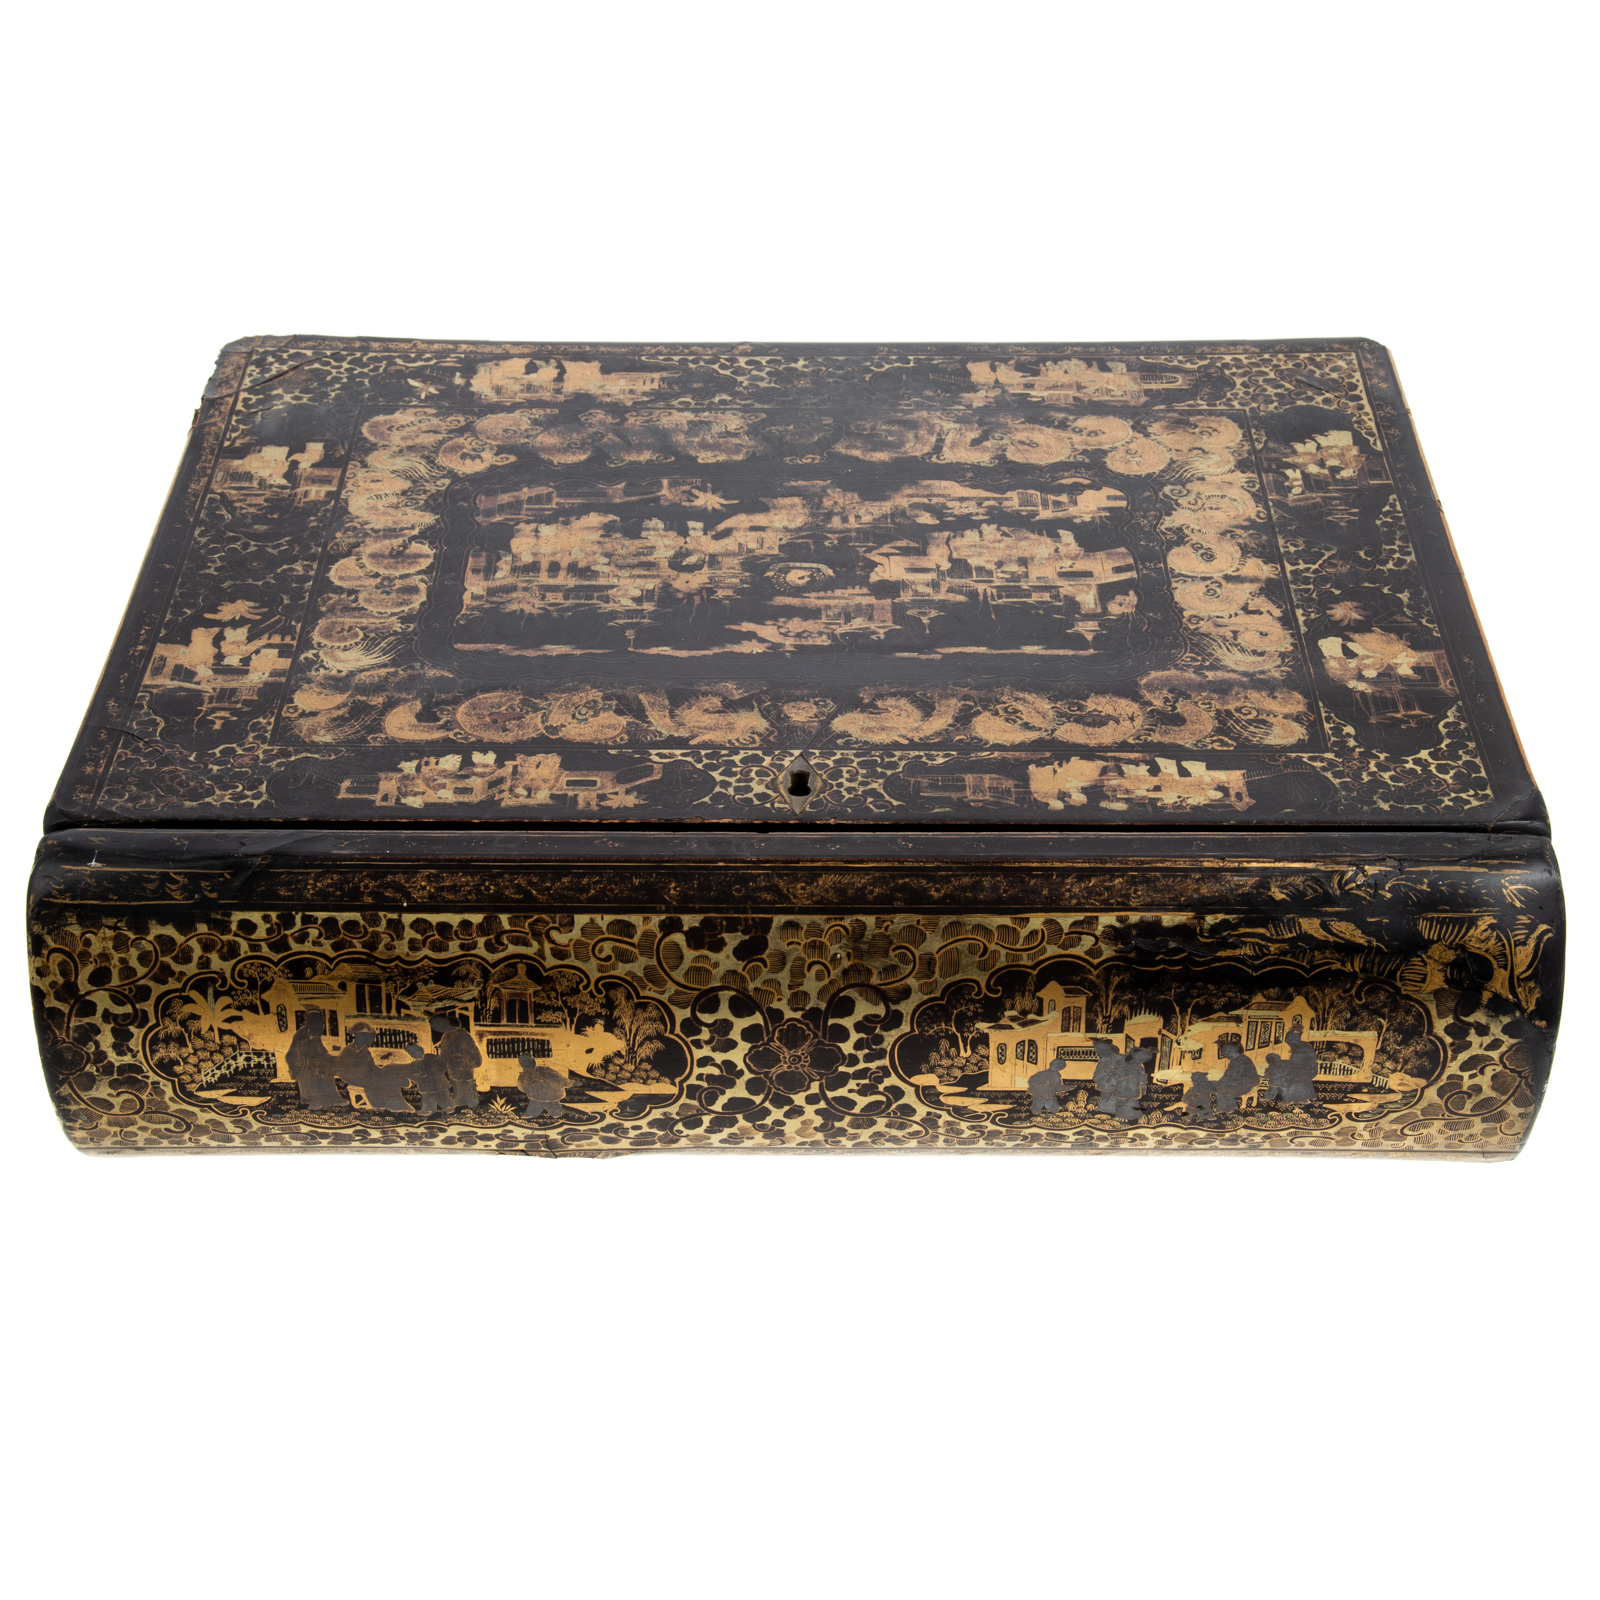 CHINESE EXPORT LACQUER SEWING BOX 36967d